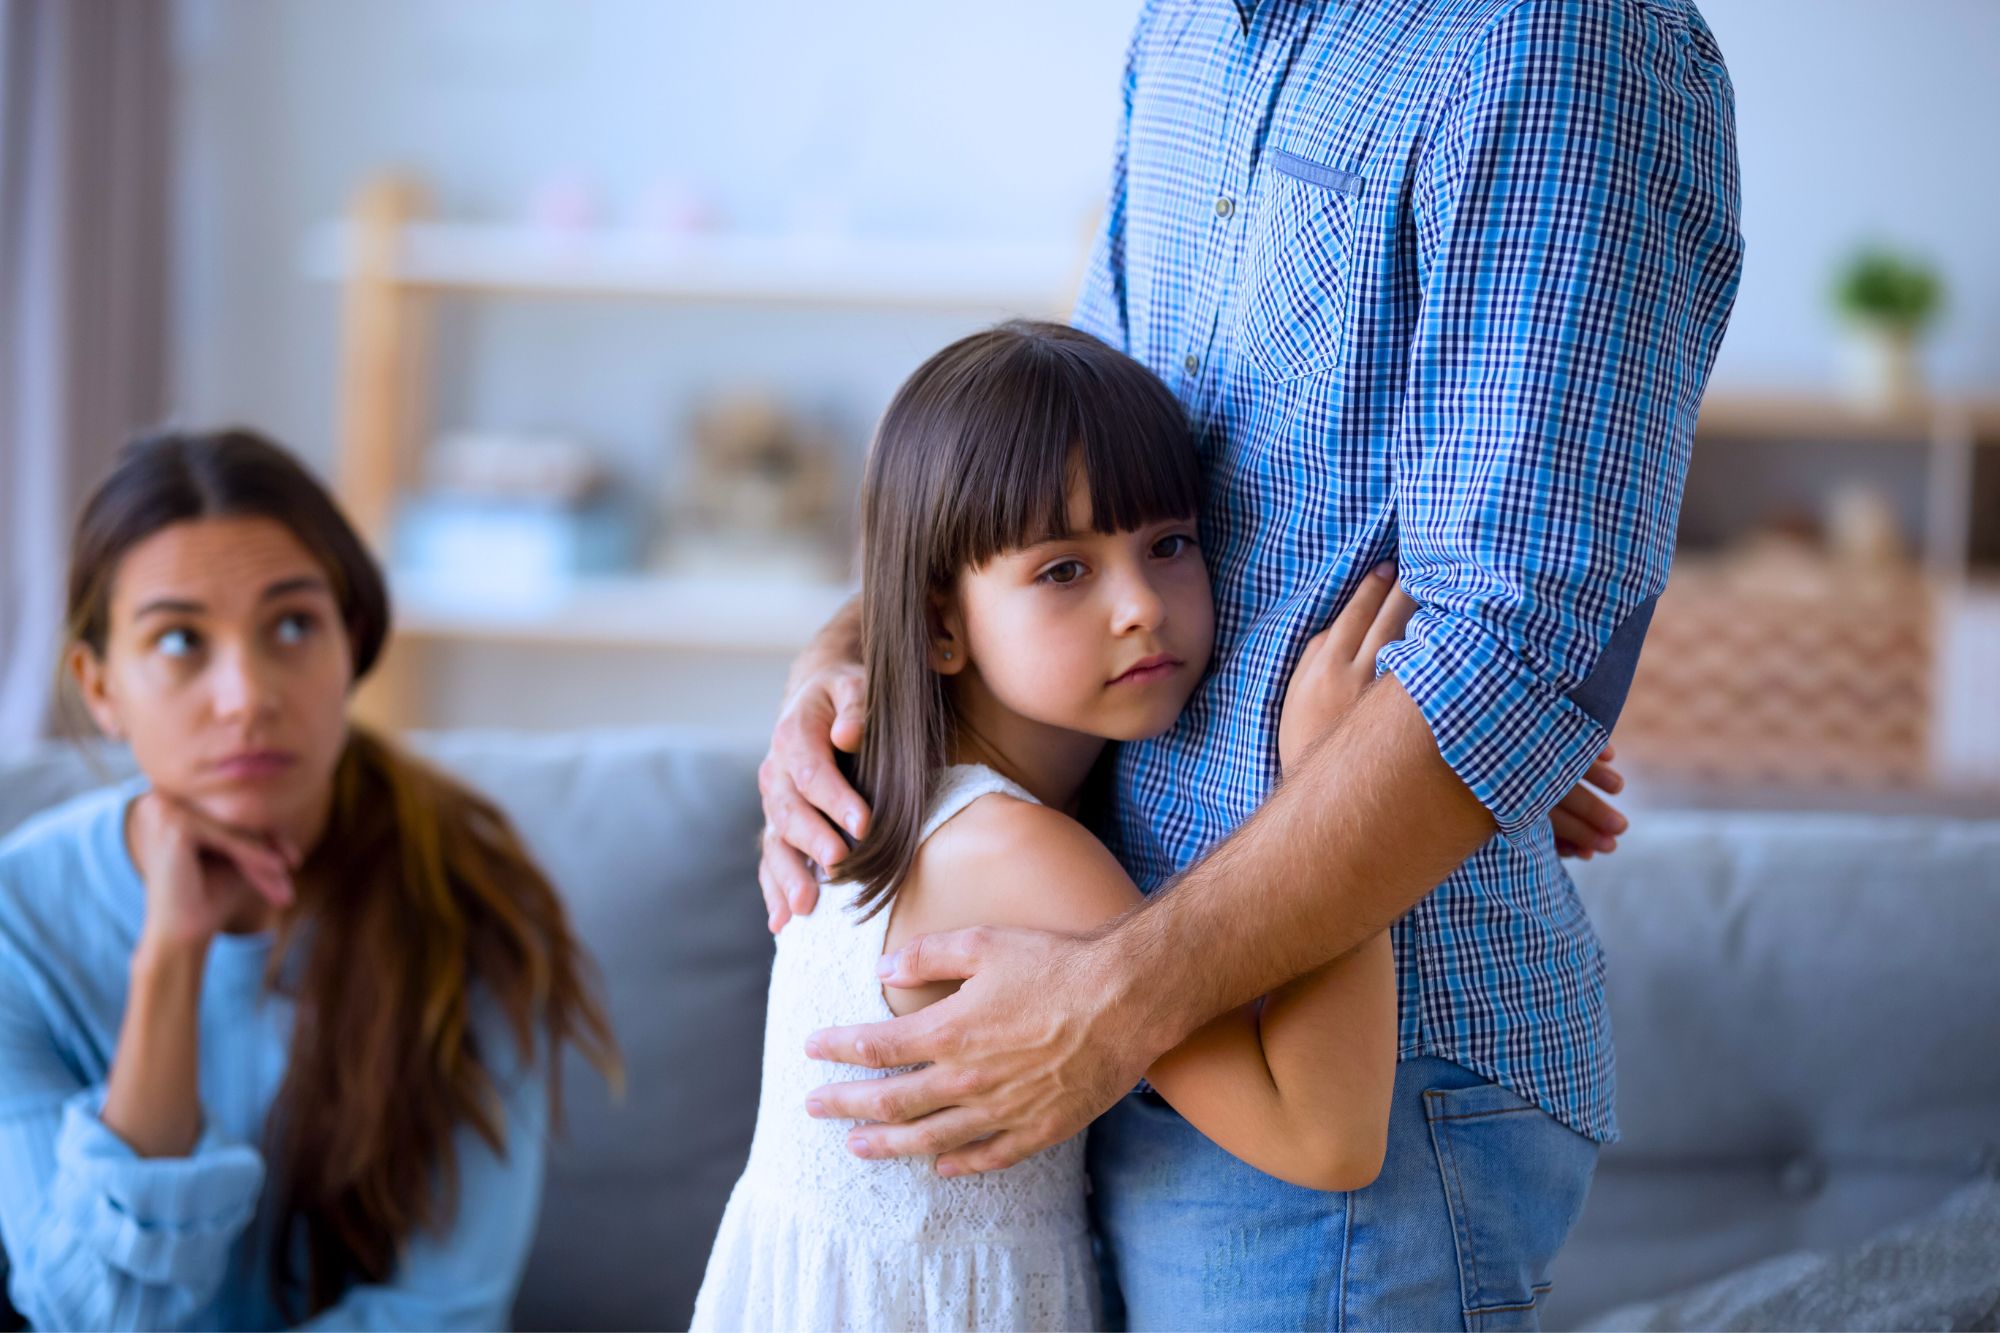 Little girl hugging father as mother looks concerned as she contemplates how to win your next co-parenting conversation